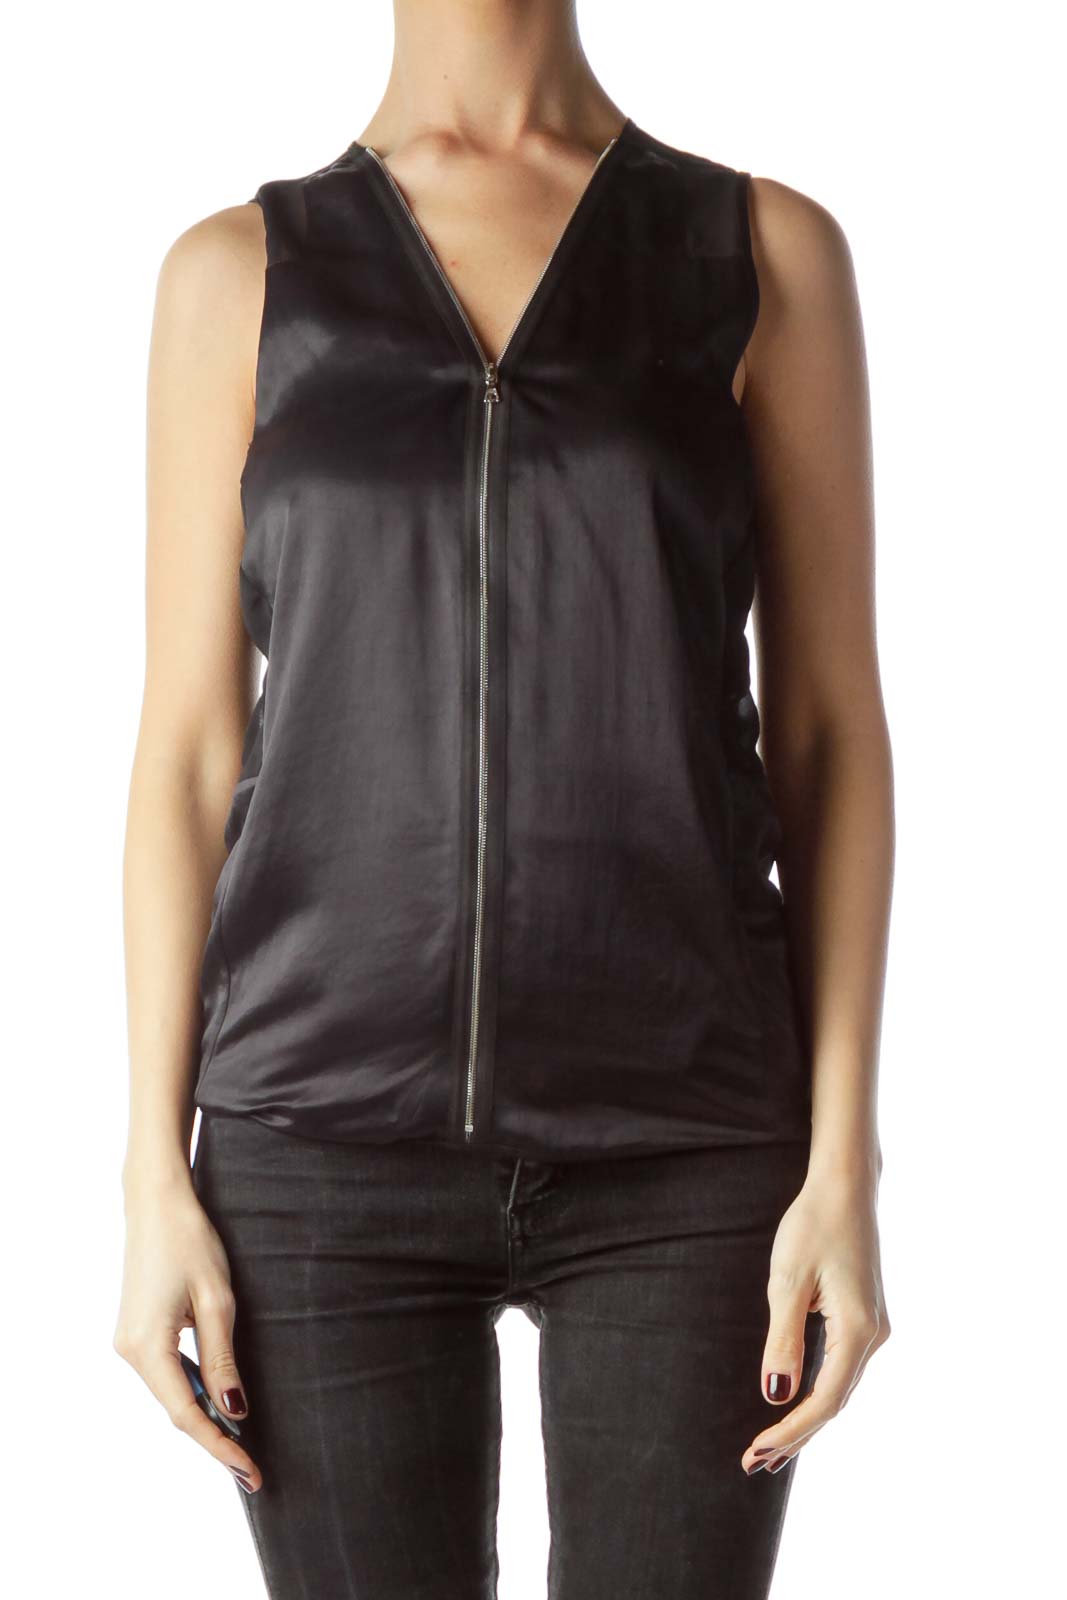 Black Zippered Up Front Sleeveless Top Front